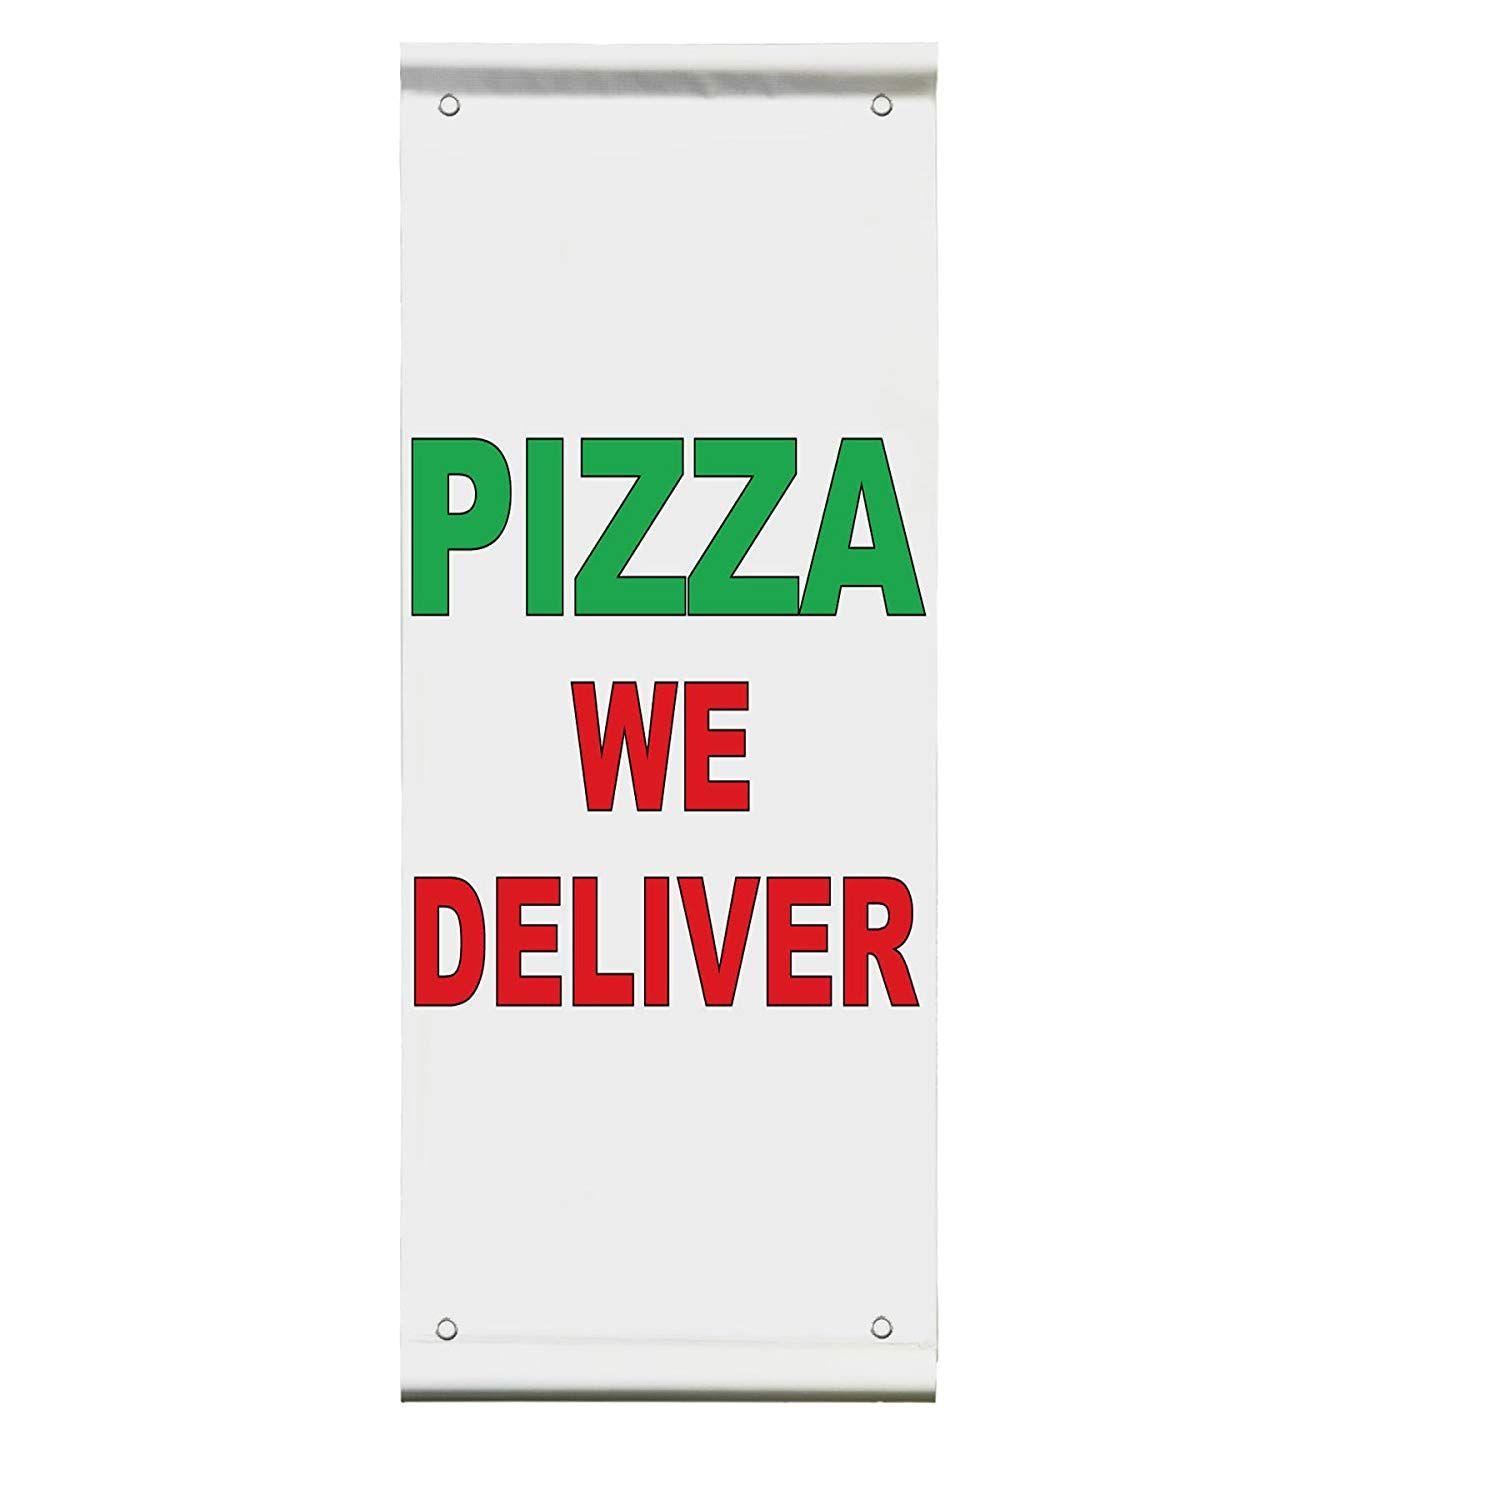 Red and Green Banner Restaurant Logo - Amazon.com : Pizza We Deliver Green Red Bar Restaurant Double Sided